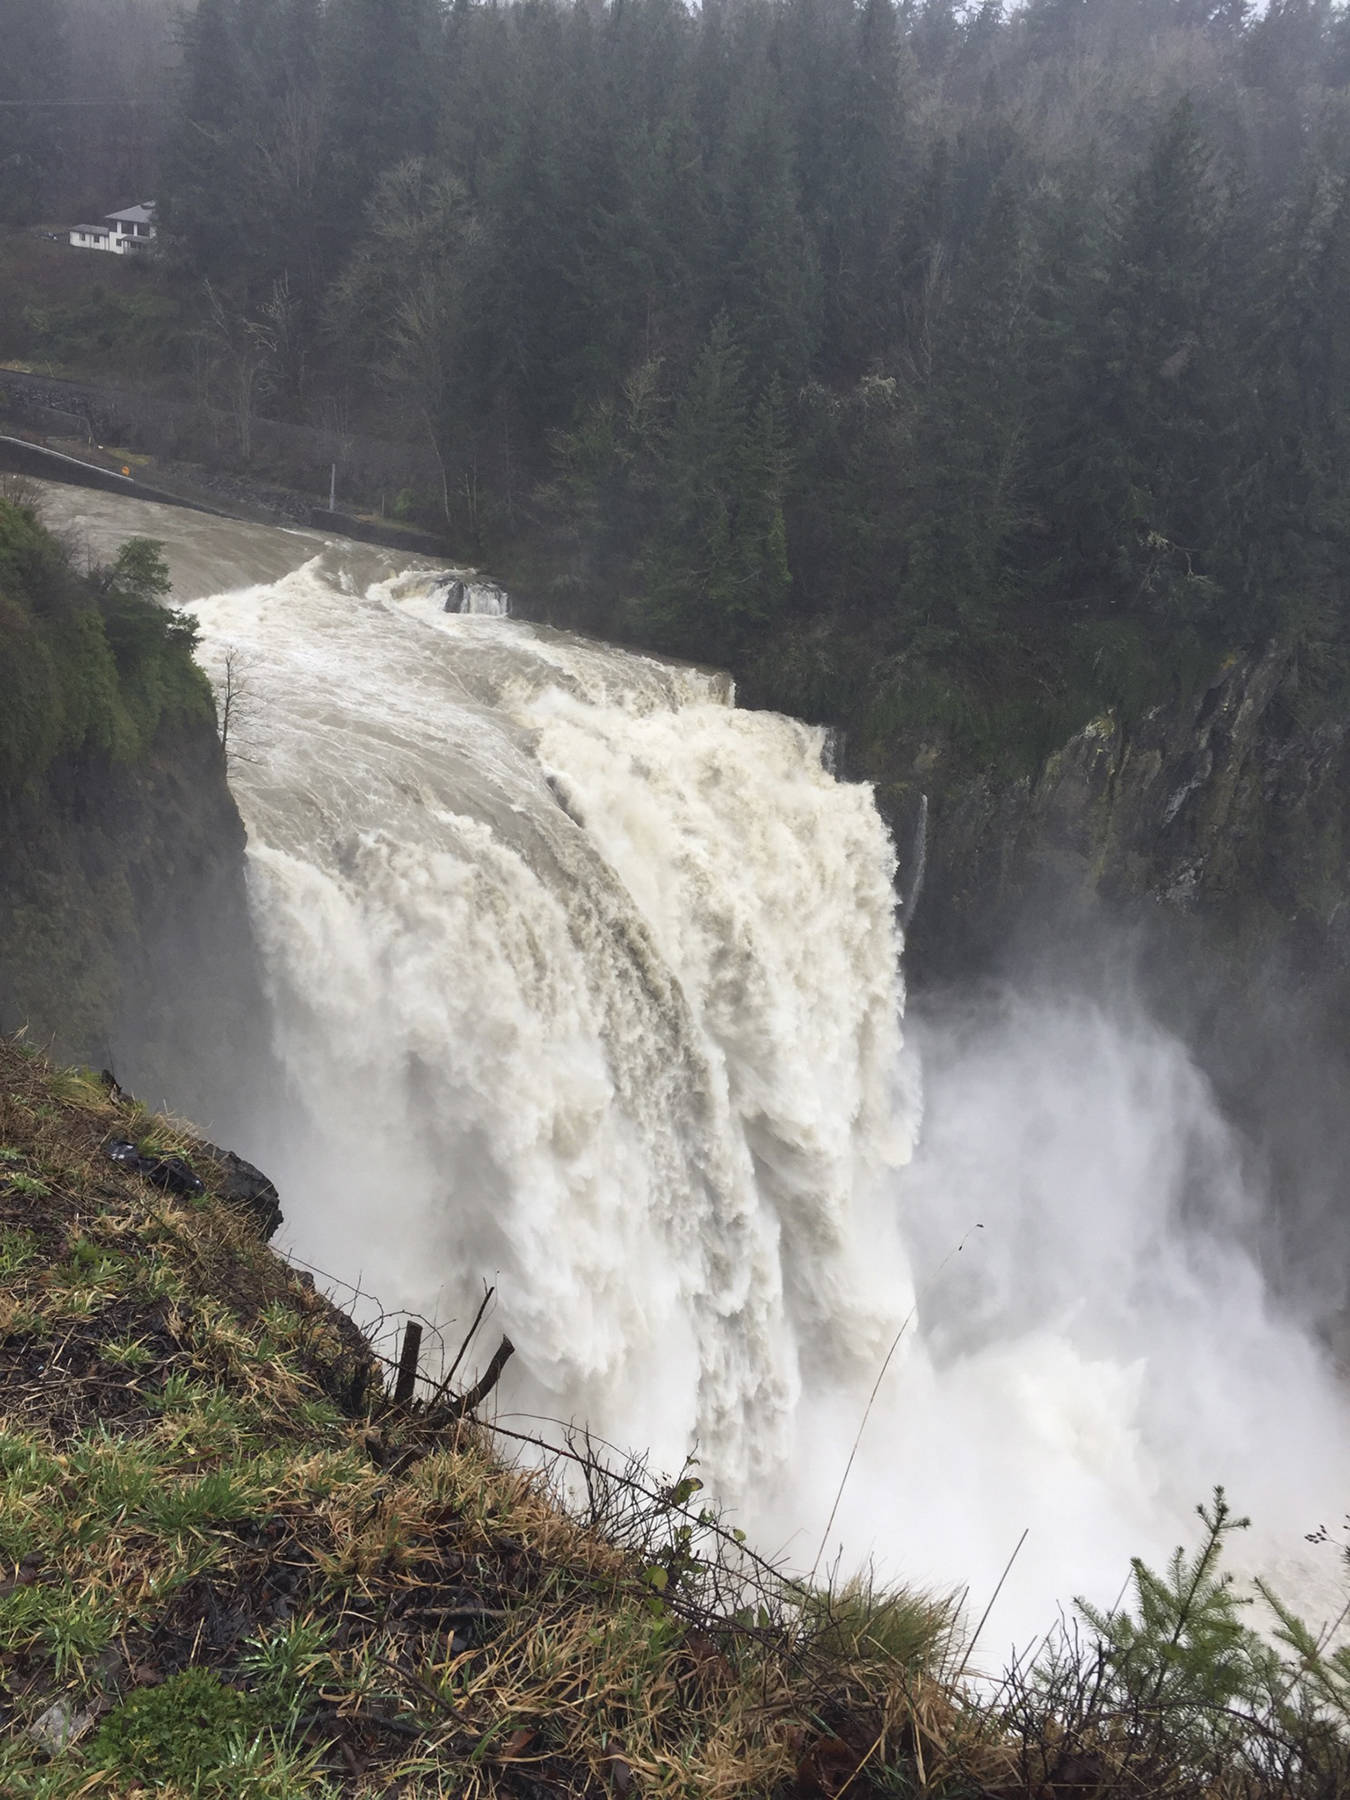 The Snoqualmie Falls ran heavy with flood water on Feb. 7. William Shaw/staff photo